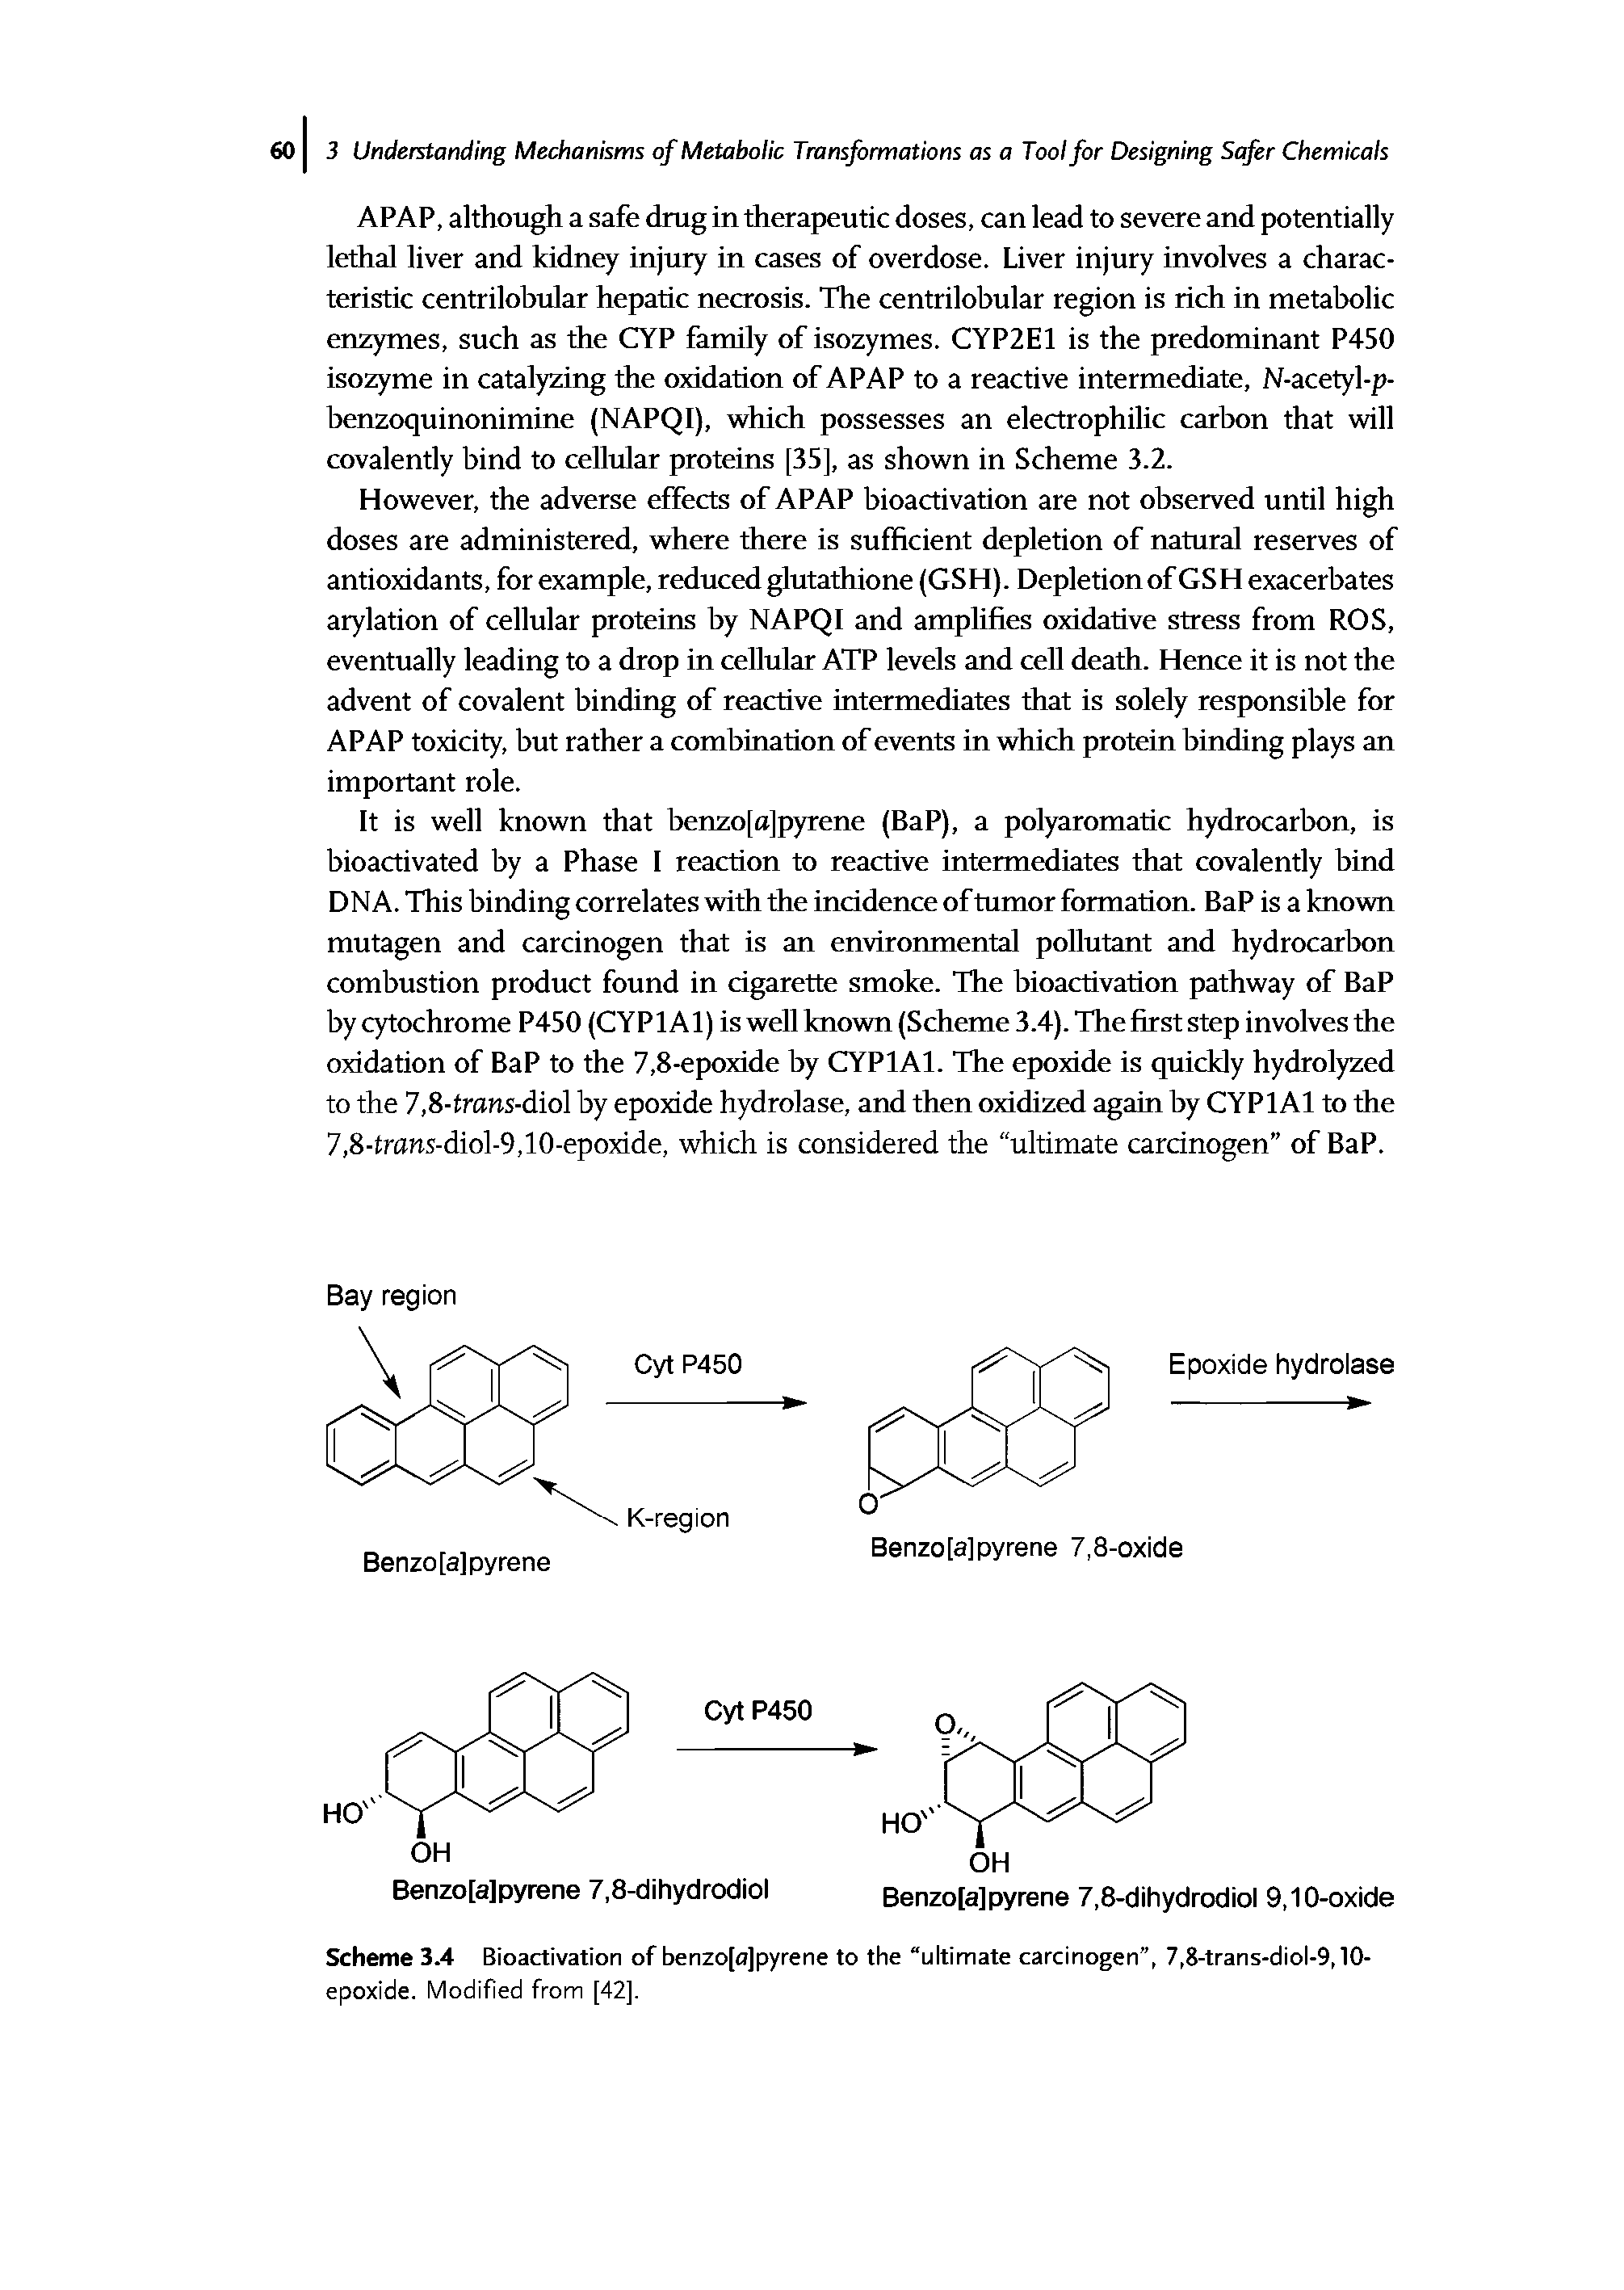 Scheme 3.4 Bioactivation of benzo[o]pyrene to the ultimate carcinogen , 7,8-trans-diol-9,10-epoxide. Modified from [42].